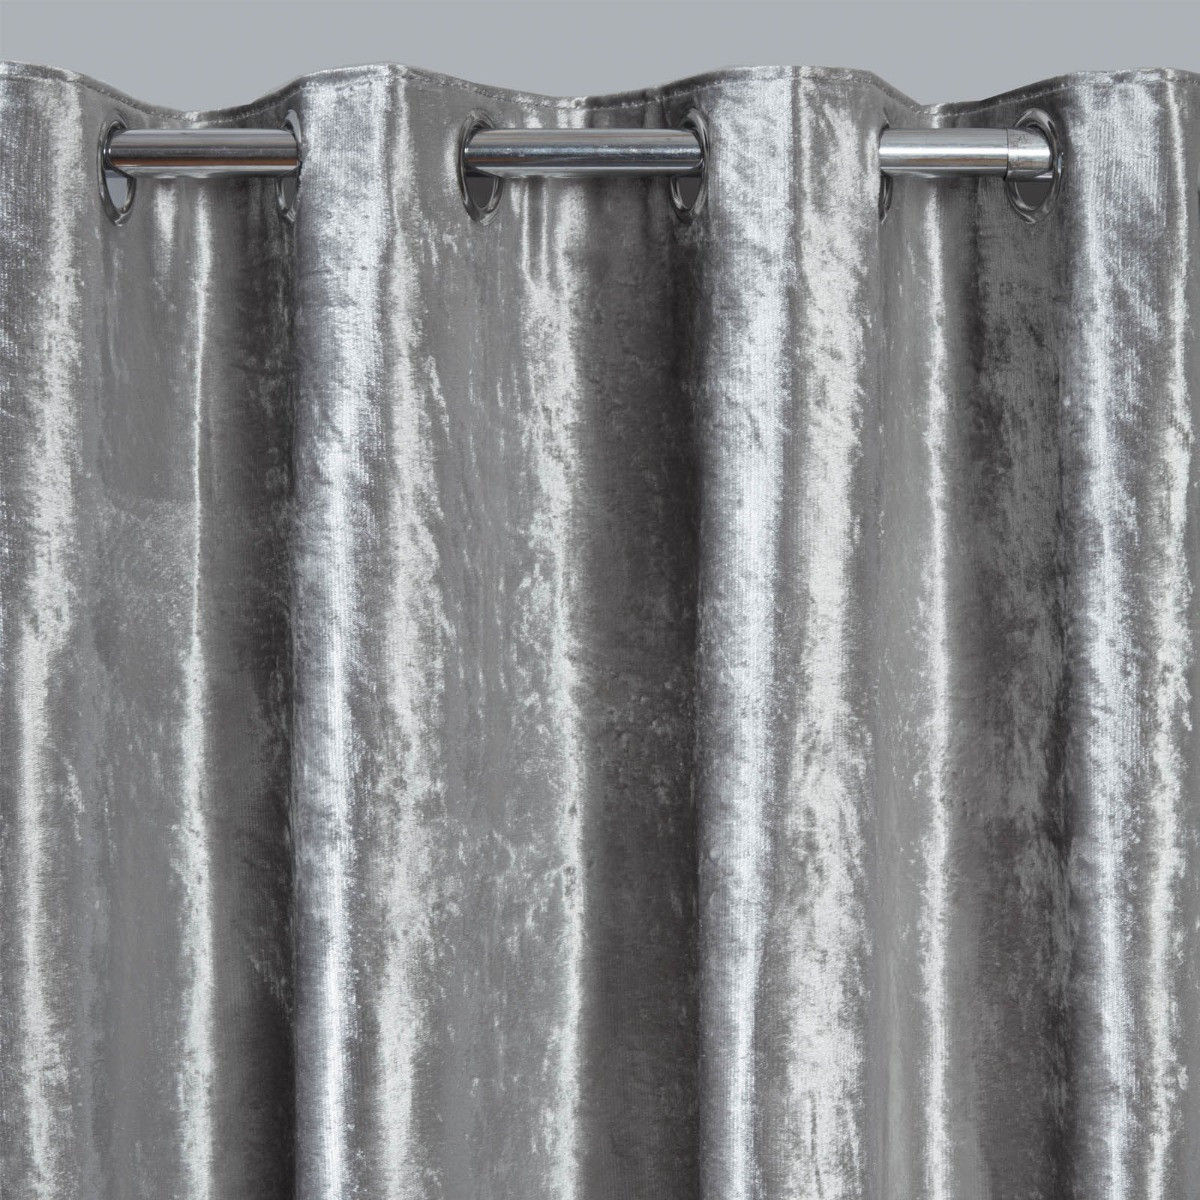 Sienna Home Crushed Velvet Eyelet Curtains - Silver 46" x 90">